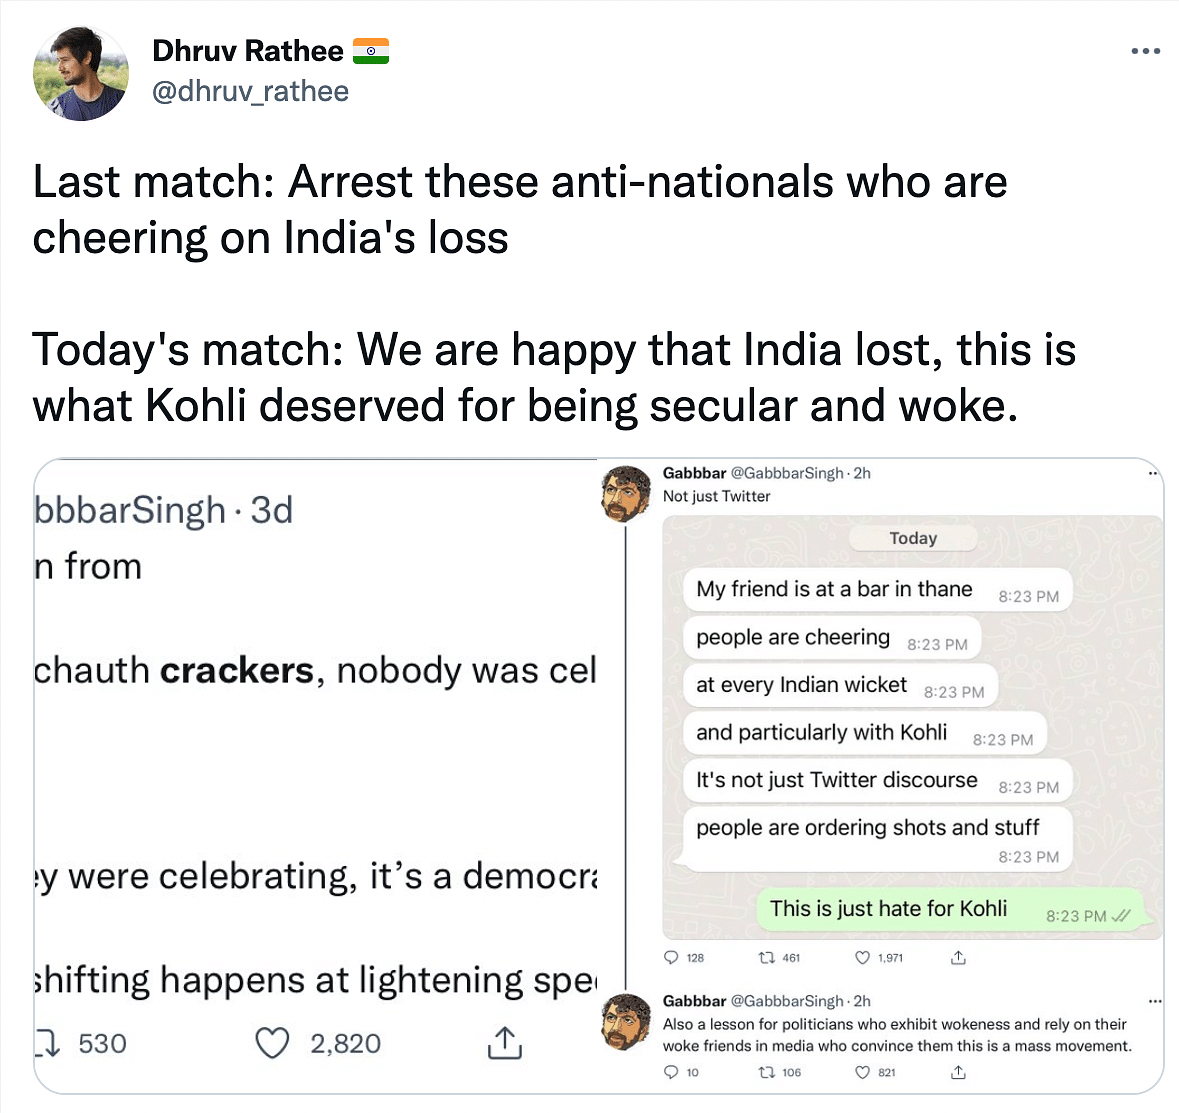 Amid Intense Backlash From Trolls, Twitter Speaks up for Indian Cricket Team